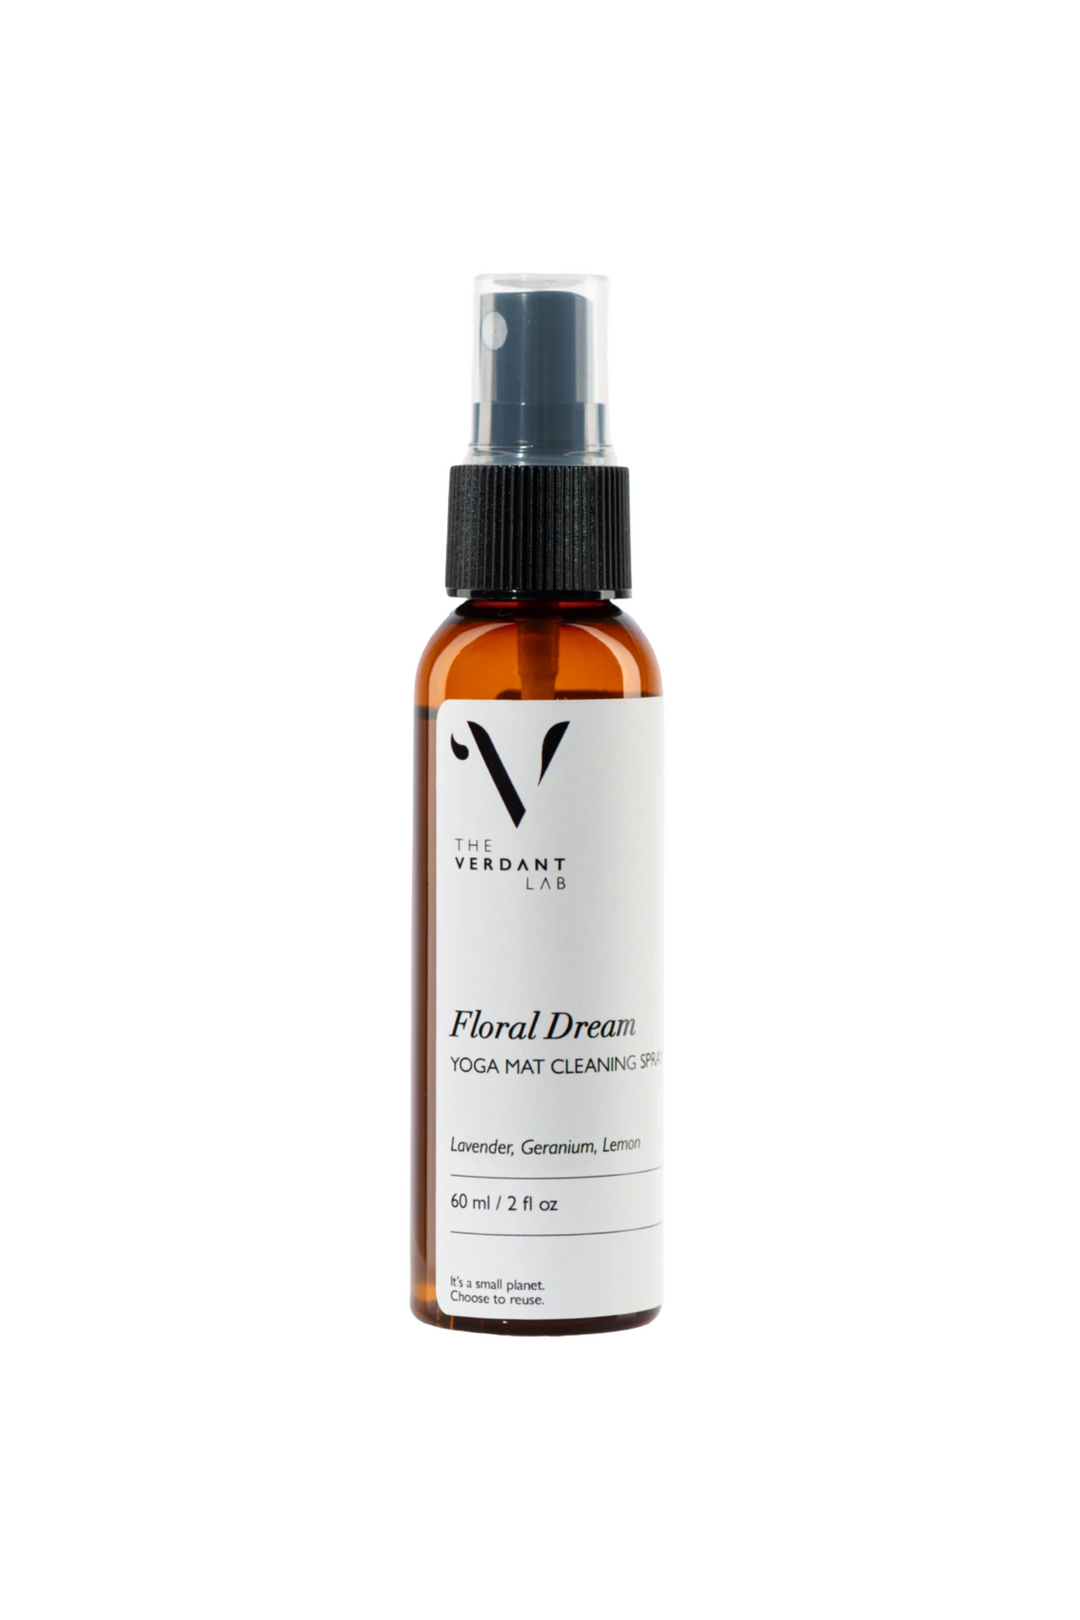 The Verdant Lab Yoga Mat Cleaning Spray in Floral Dream, available on ZERRIN with free Singapore shipping above $50